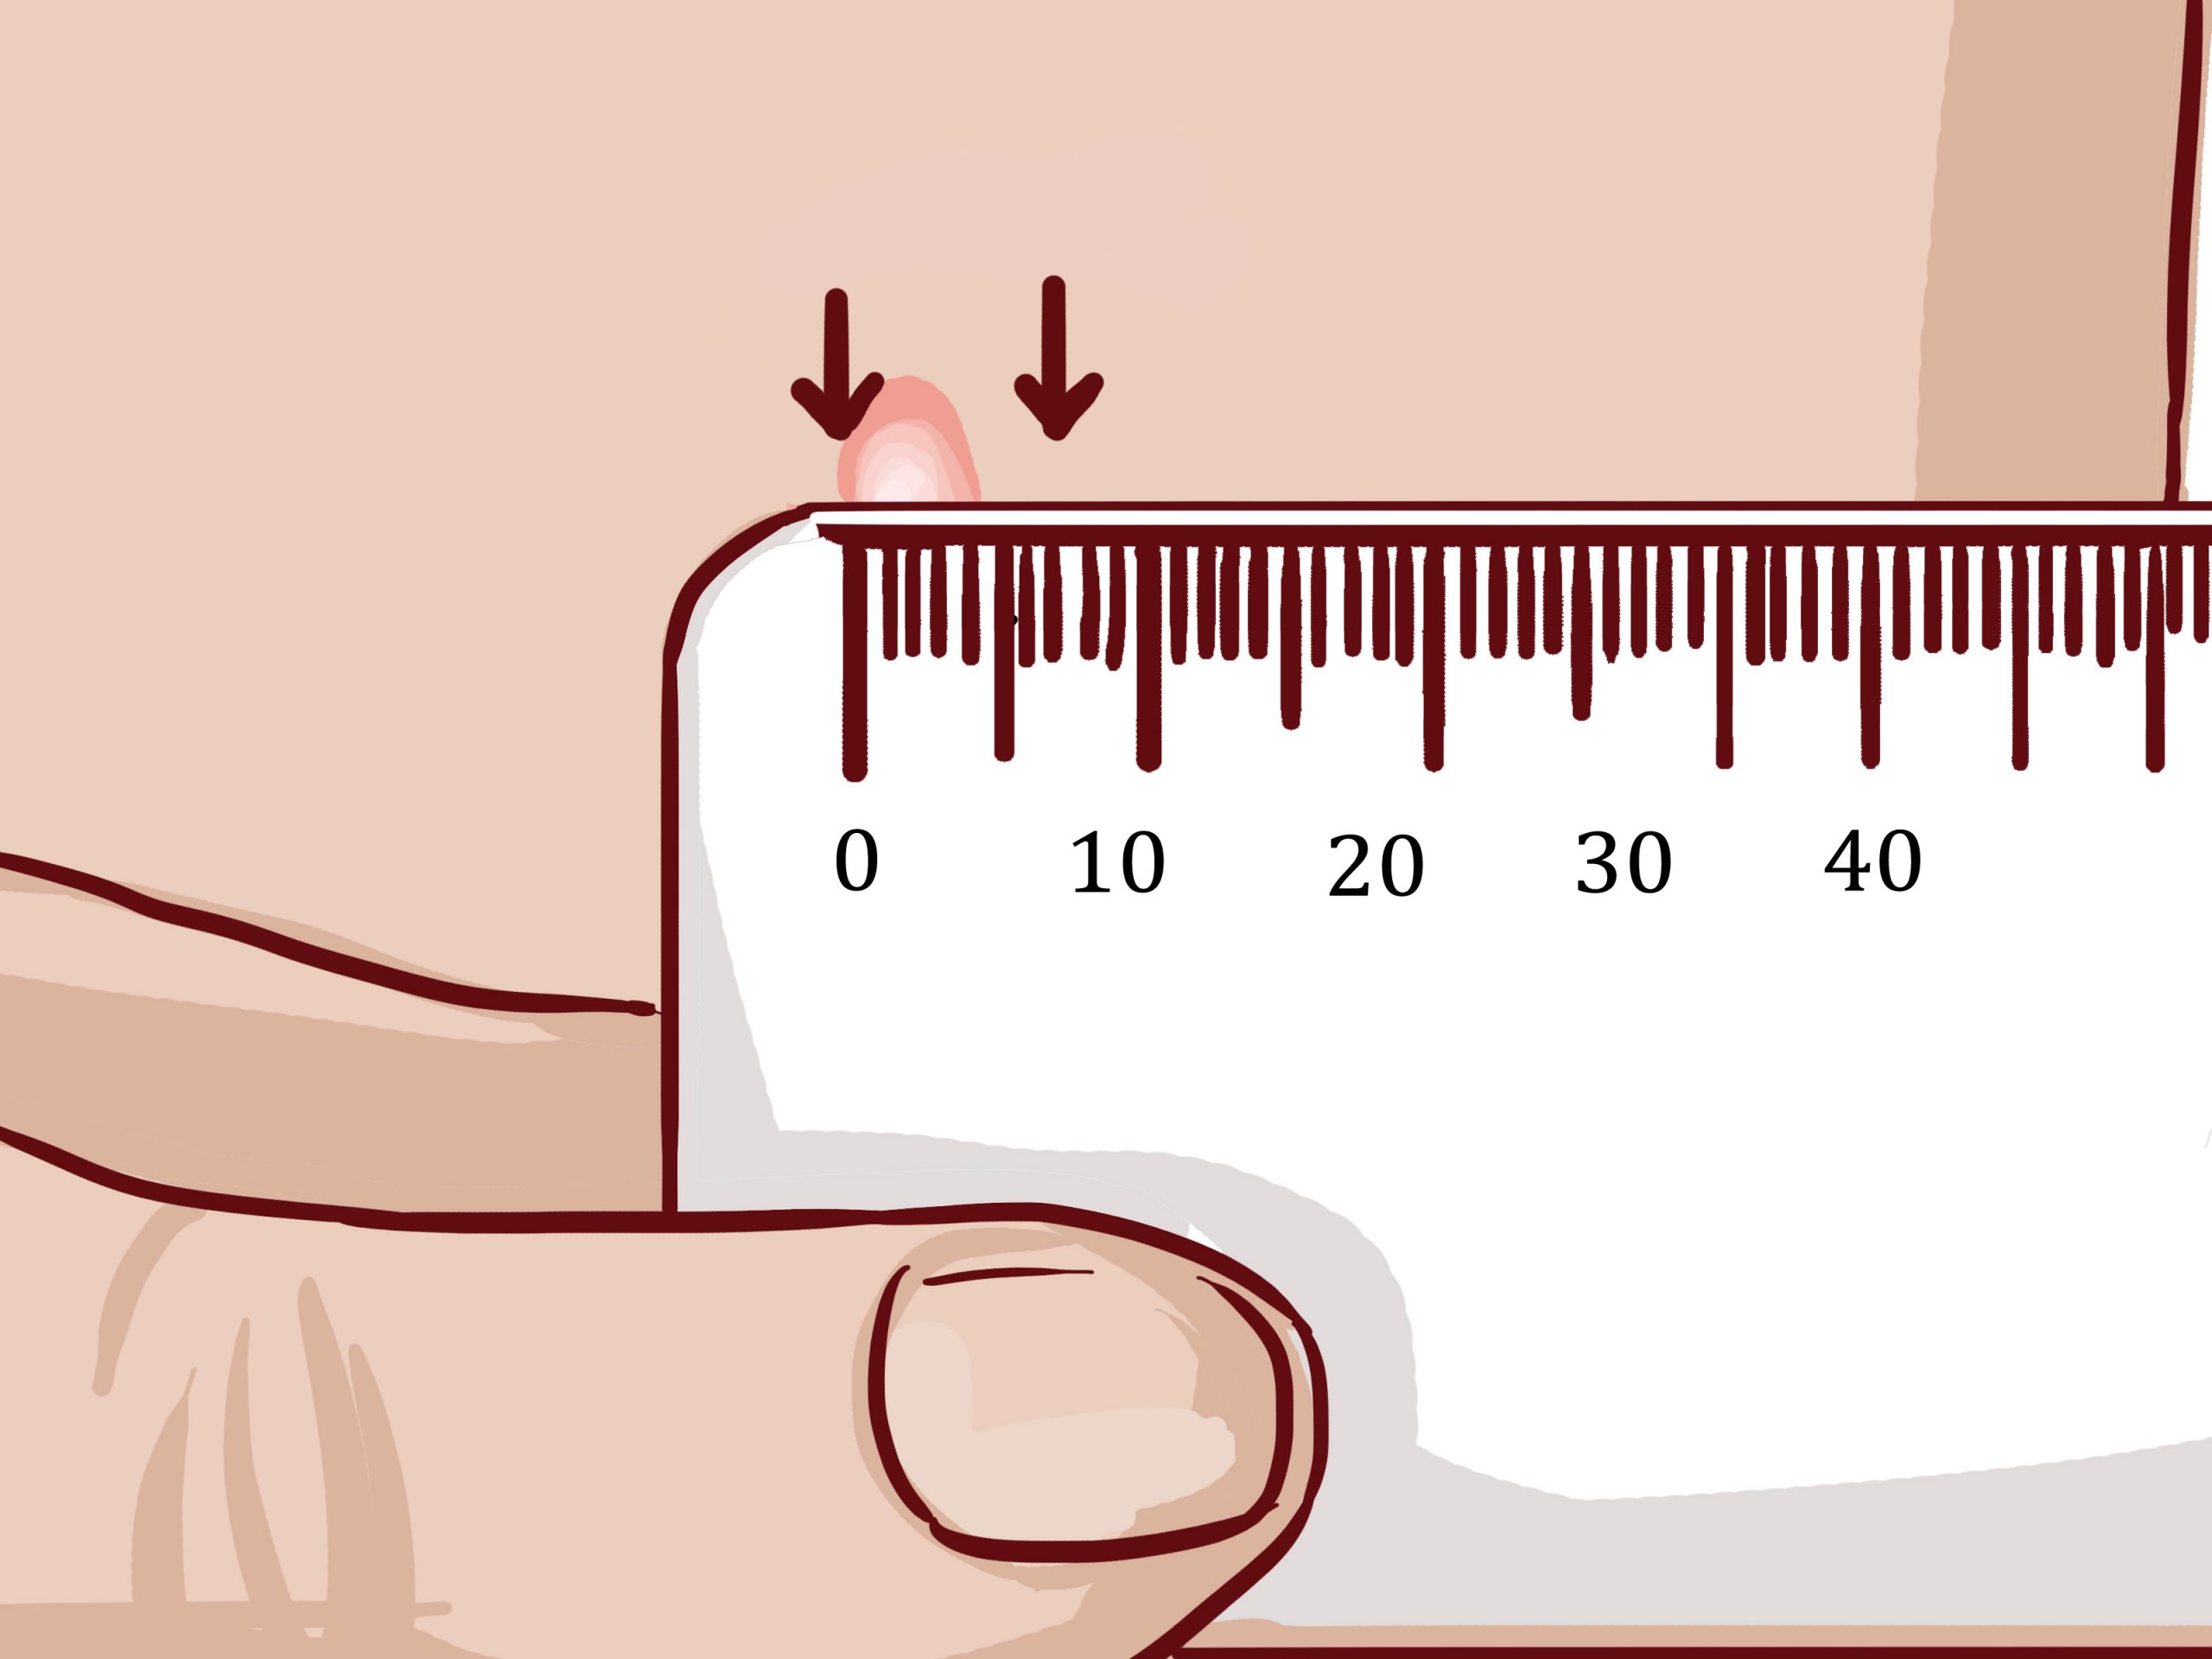 How To Read A Tuberculosis Skin Test: 9 Steps (With Pictures)